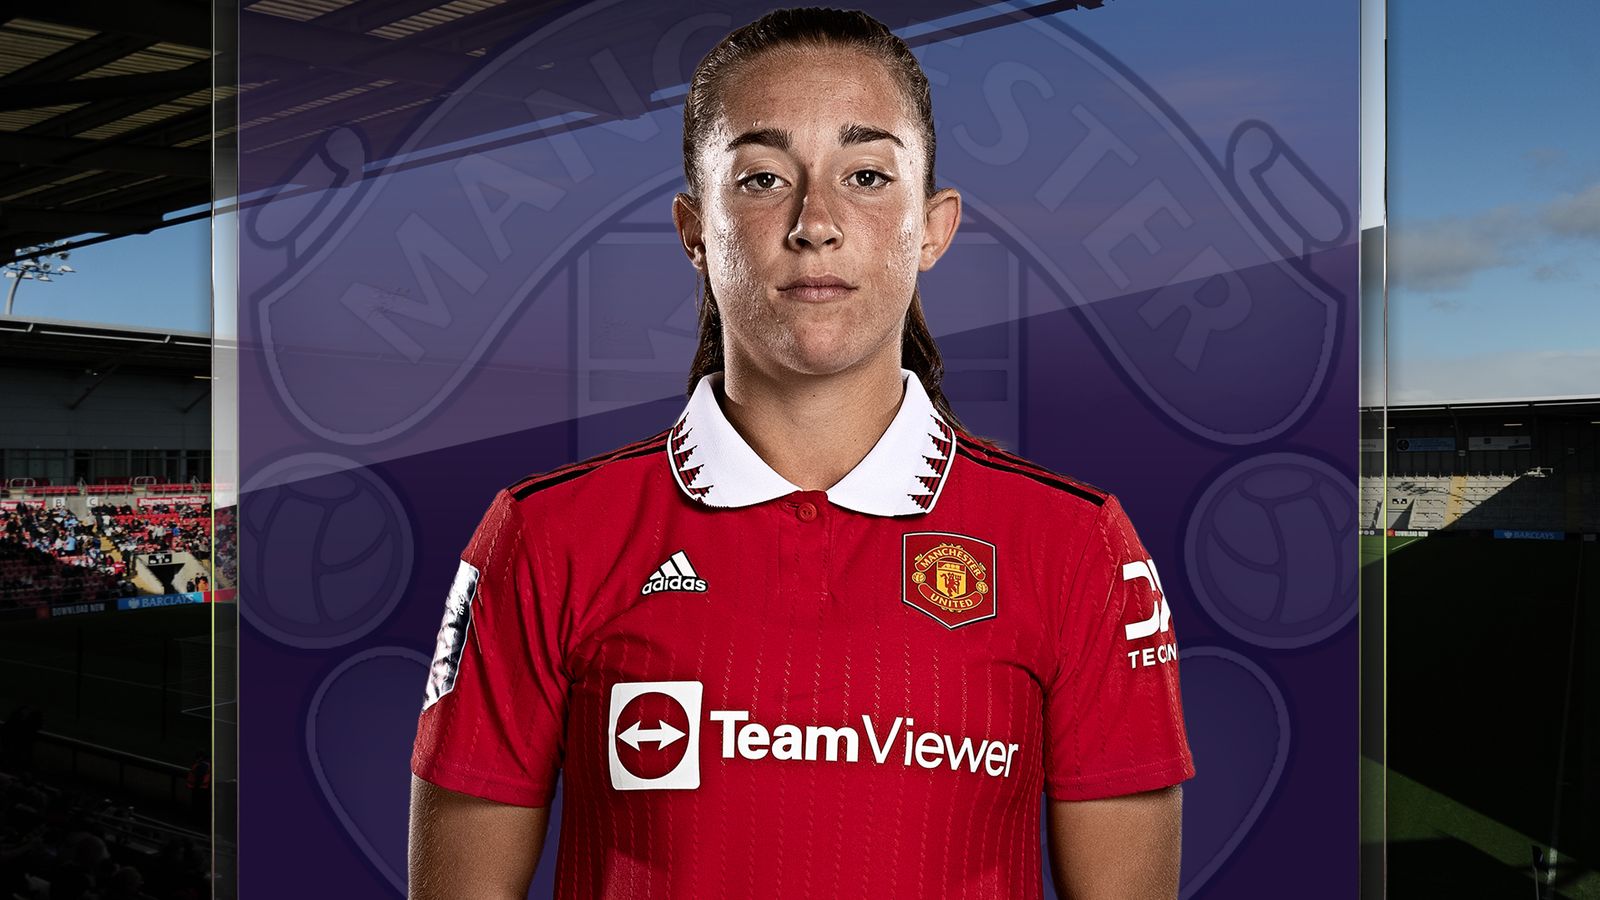 Maya Le Tissier: Man Utd Women defender's rise charted from playing with boys in Guernsey to her England debut | Football News | Sky Sports